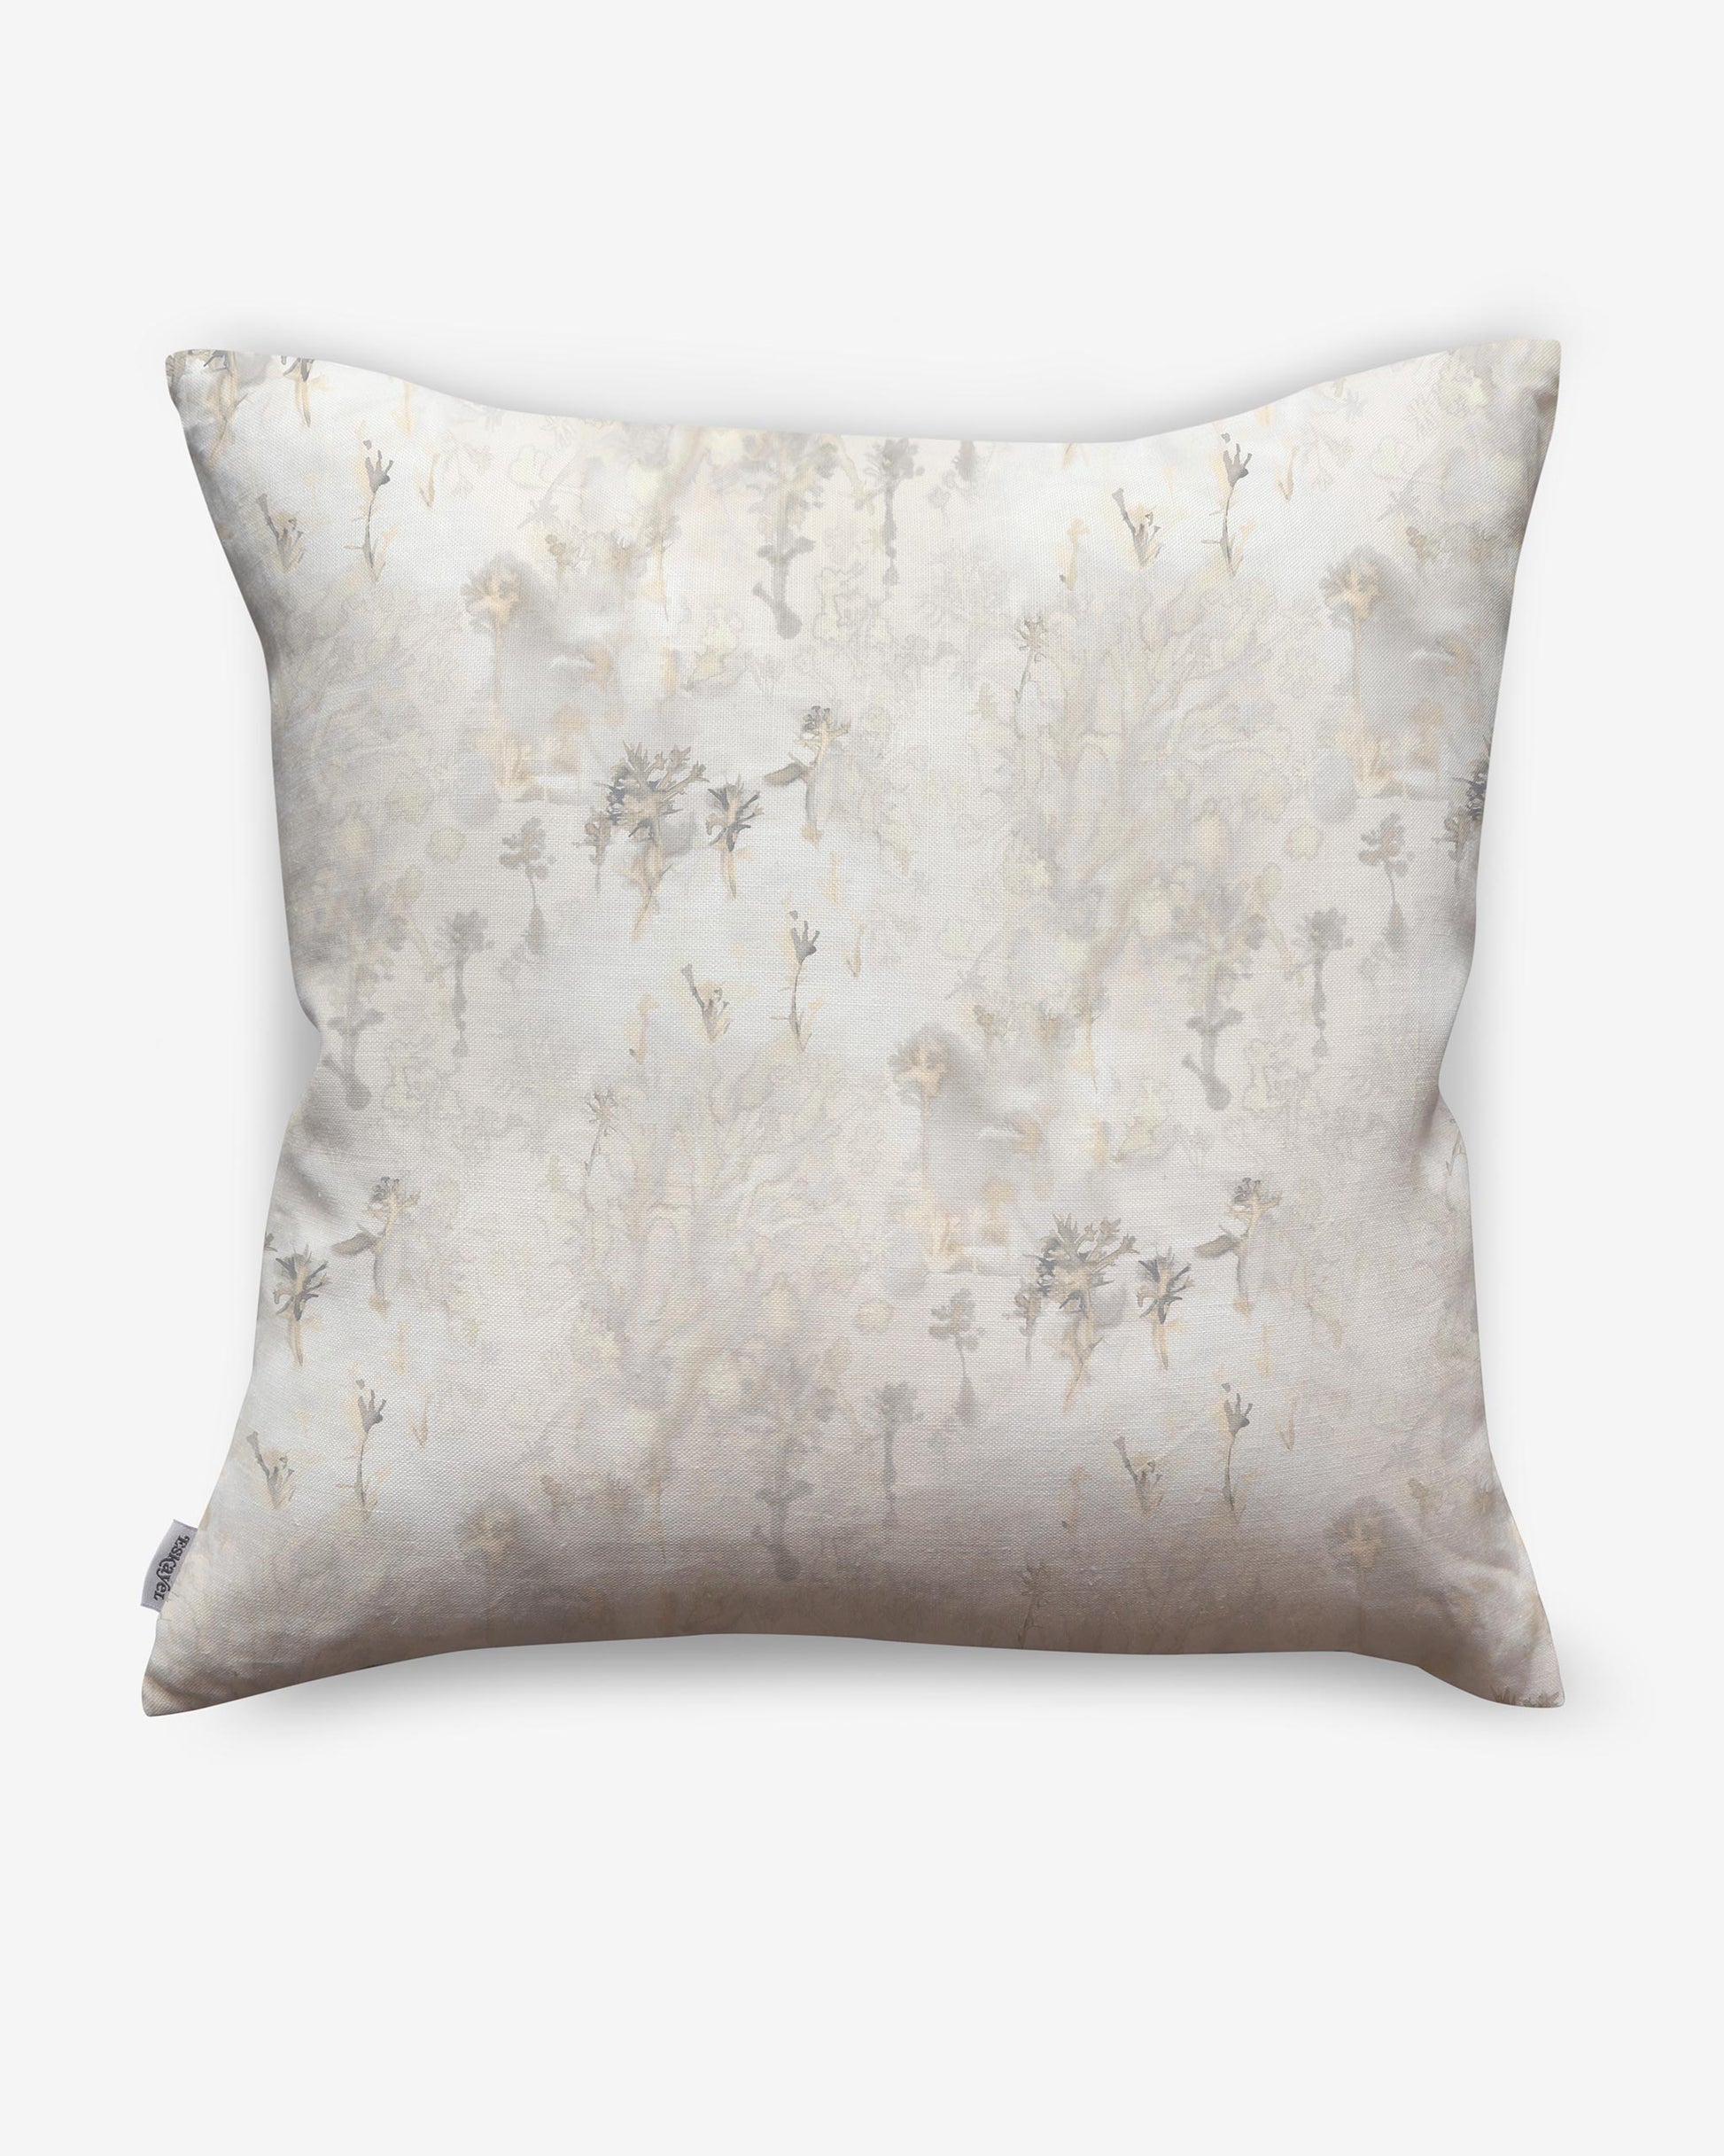 A white and beige Emvasia Pillow with a floral pattern